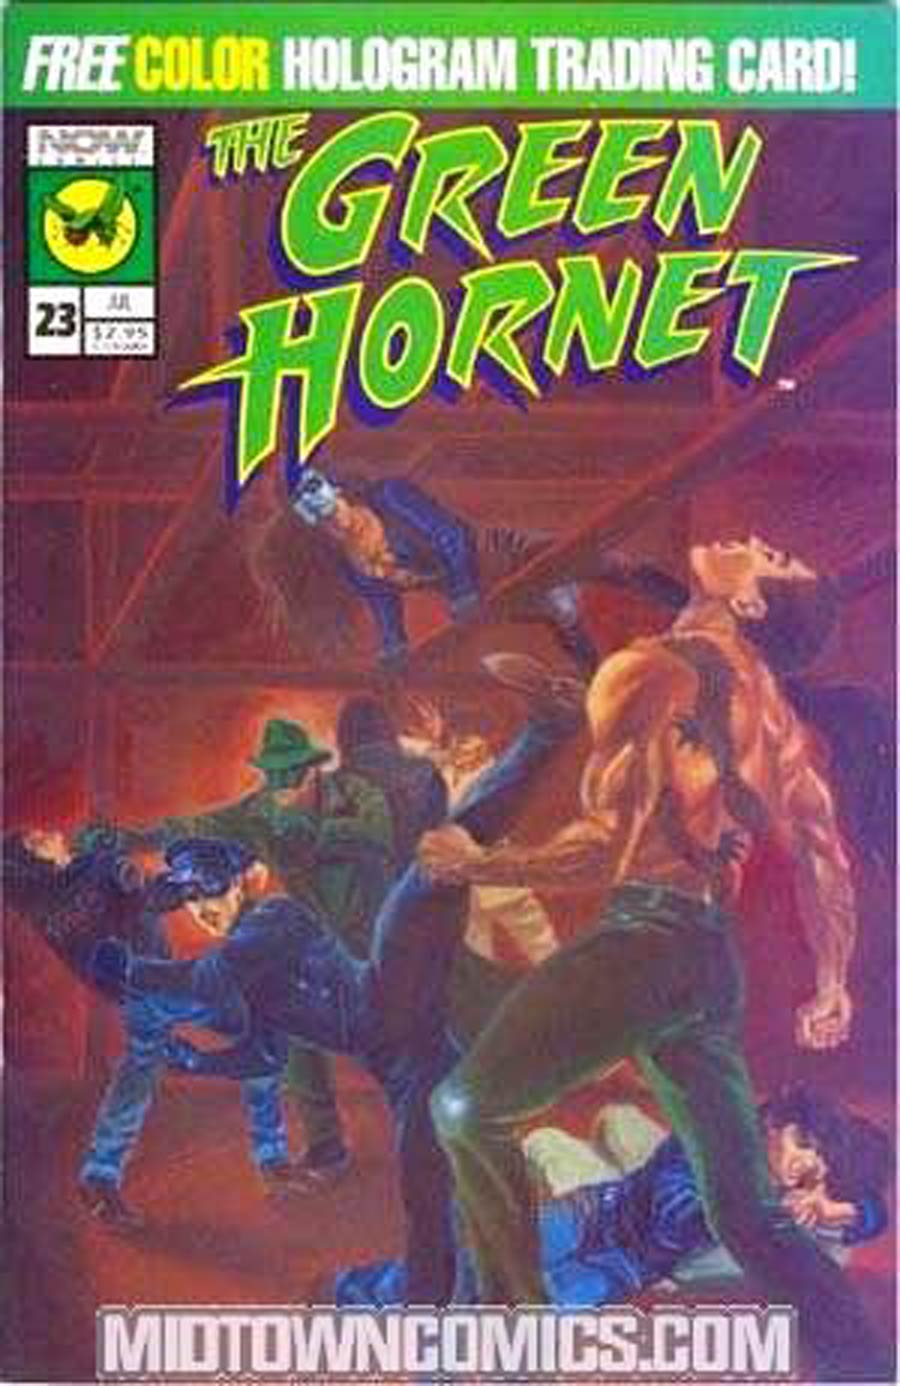 Green Hornet Vol 3 #23 Cover B Without Polybag